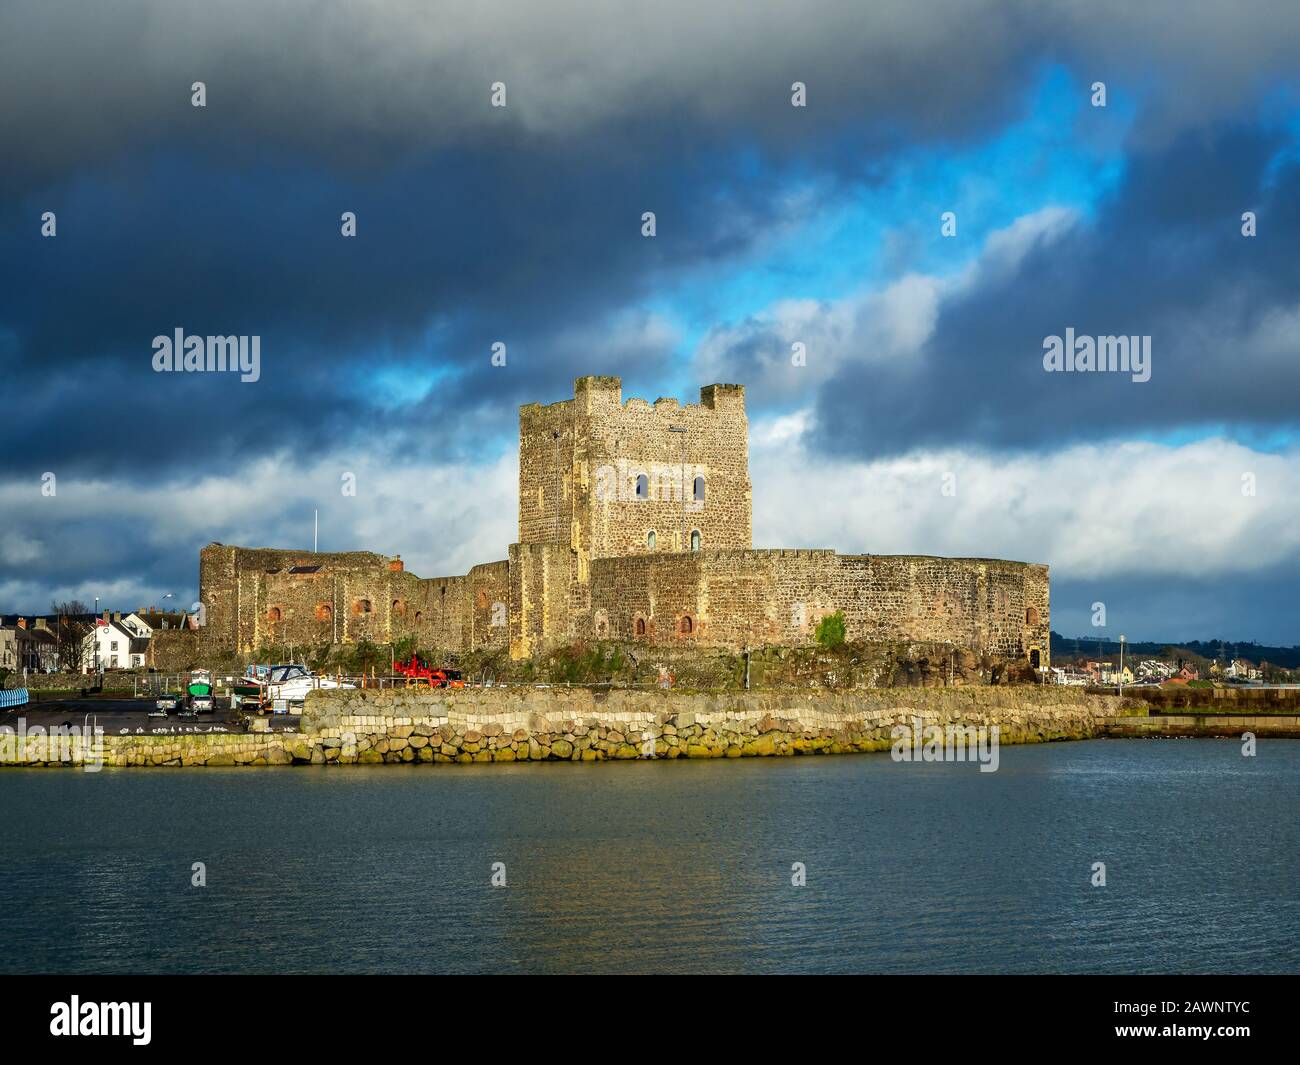 Medieval Norman Castle in Carrickfergus near Belfast, Northern Ireland, with marina in winter. Dramatic sky with dark stormy clouds. Sunset light Stock Photo